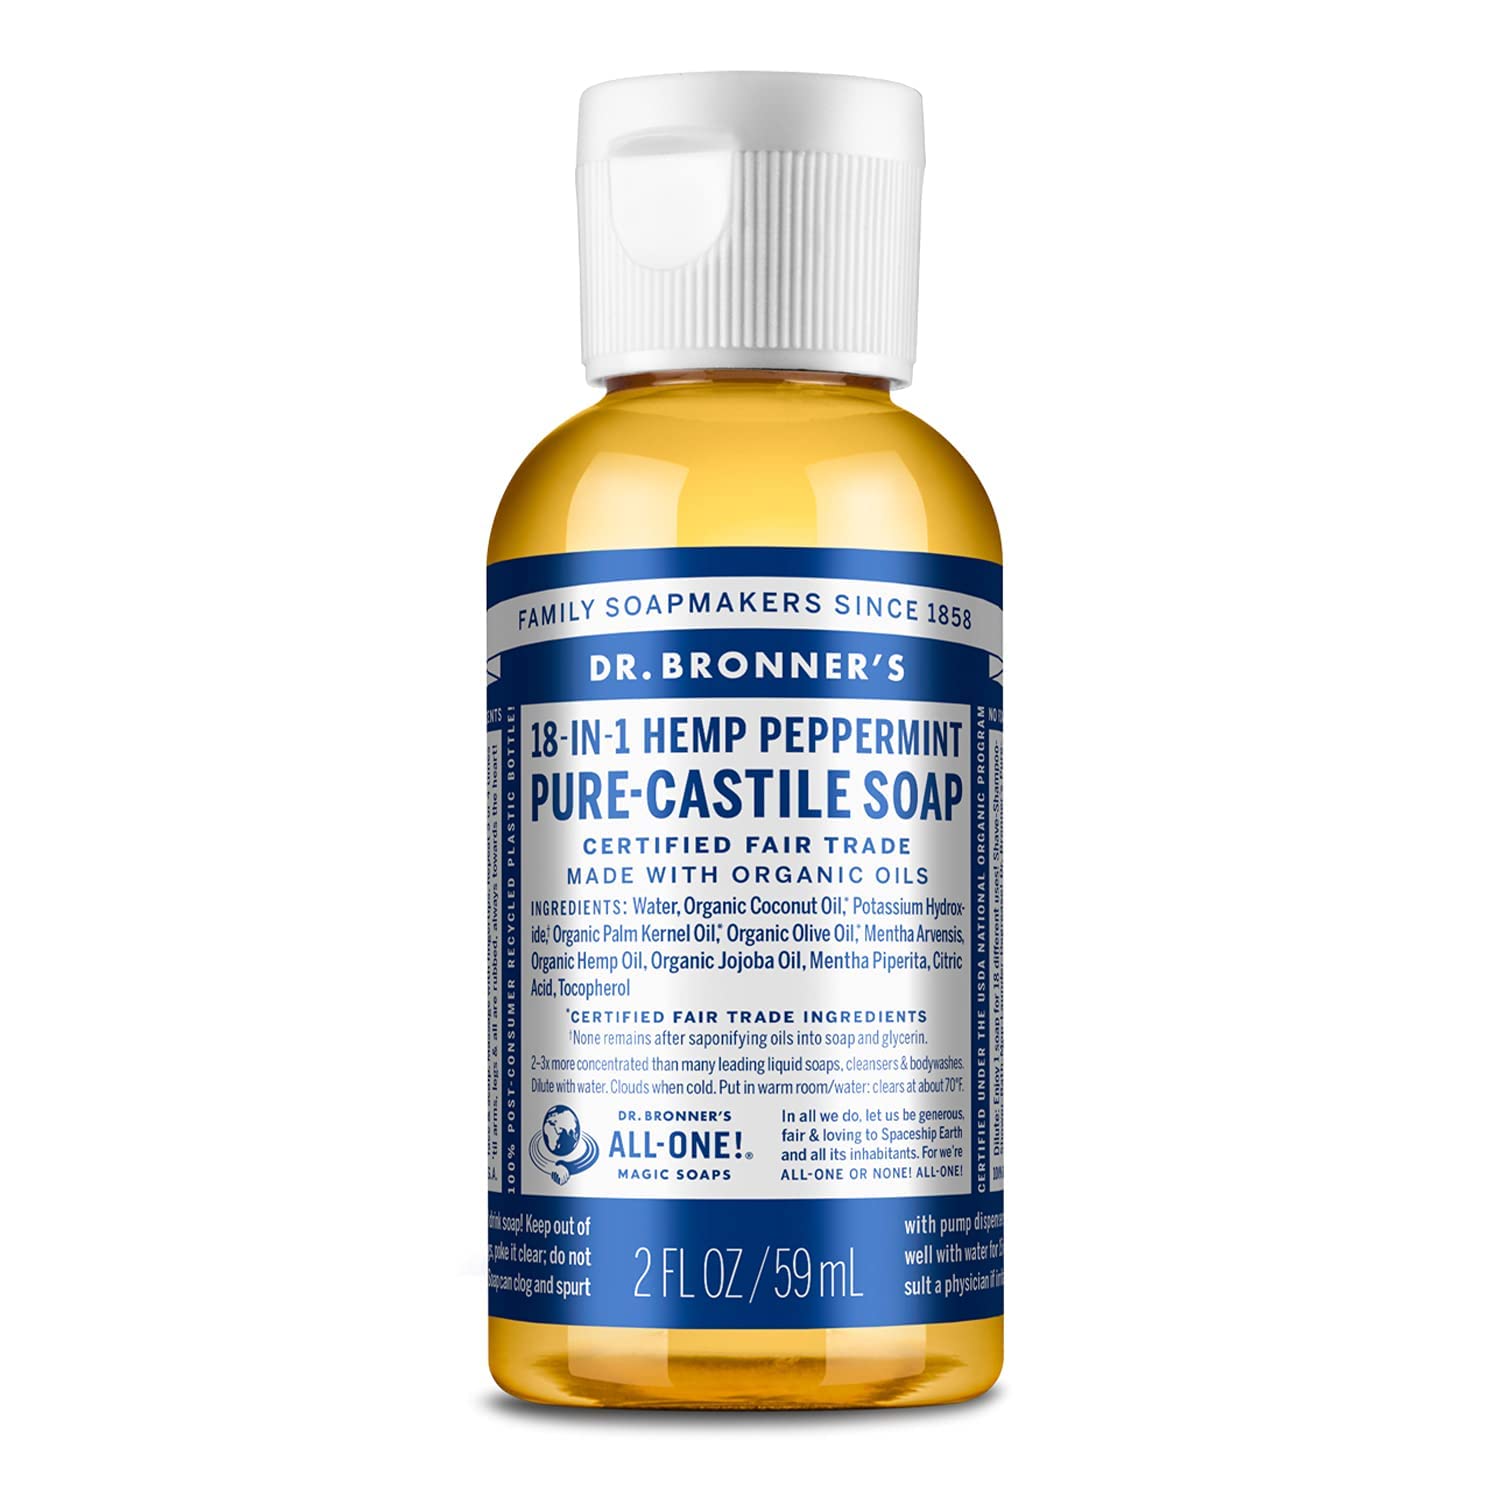 Dr. Bronner’s Pure-Castile Liquid Soap doubles as laundry soap if you need to hand wash